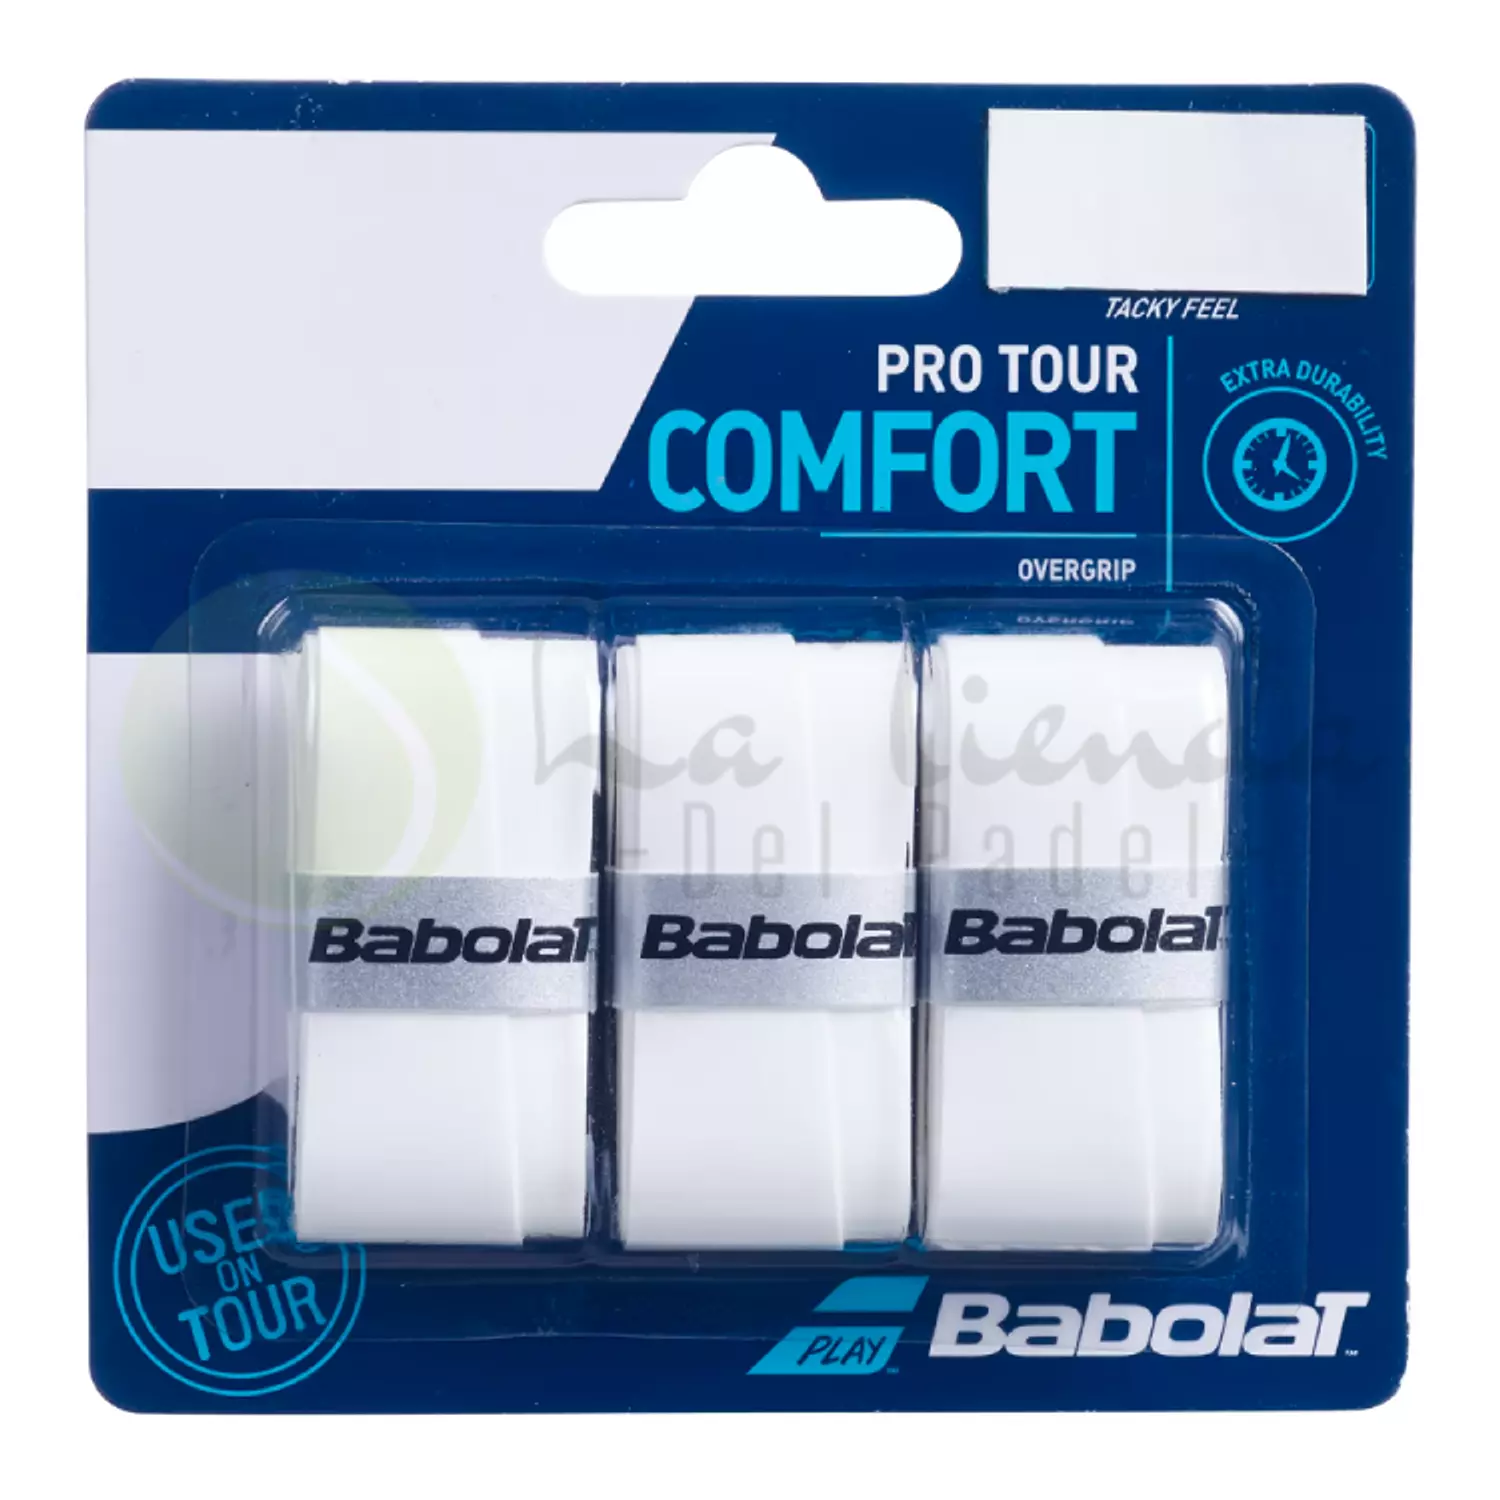 Babolat Pro Tour Comfrot White Overgrip (Pack of 3) hover image